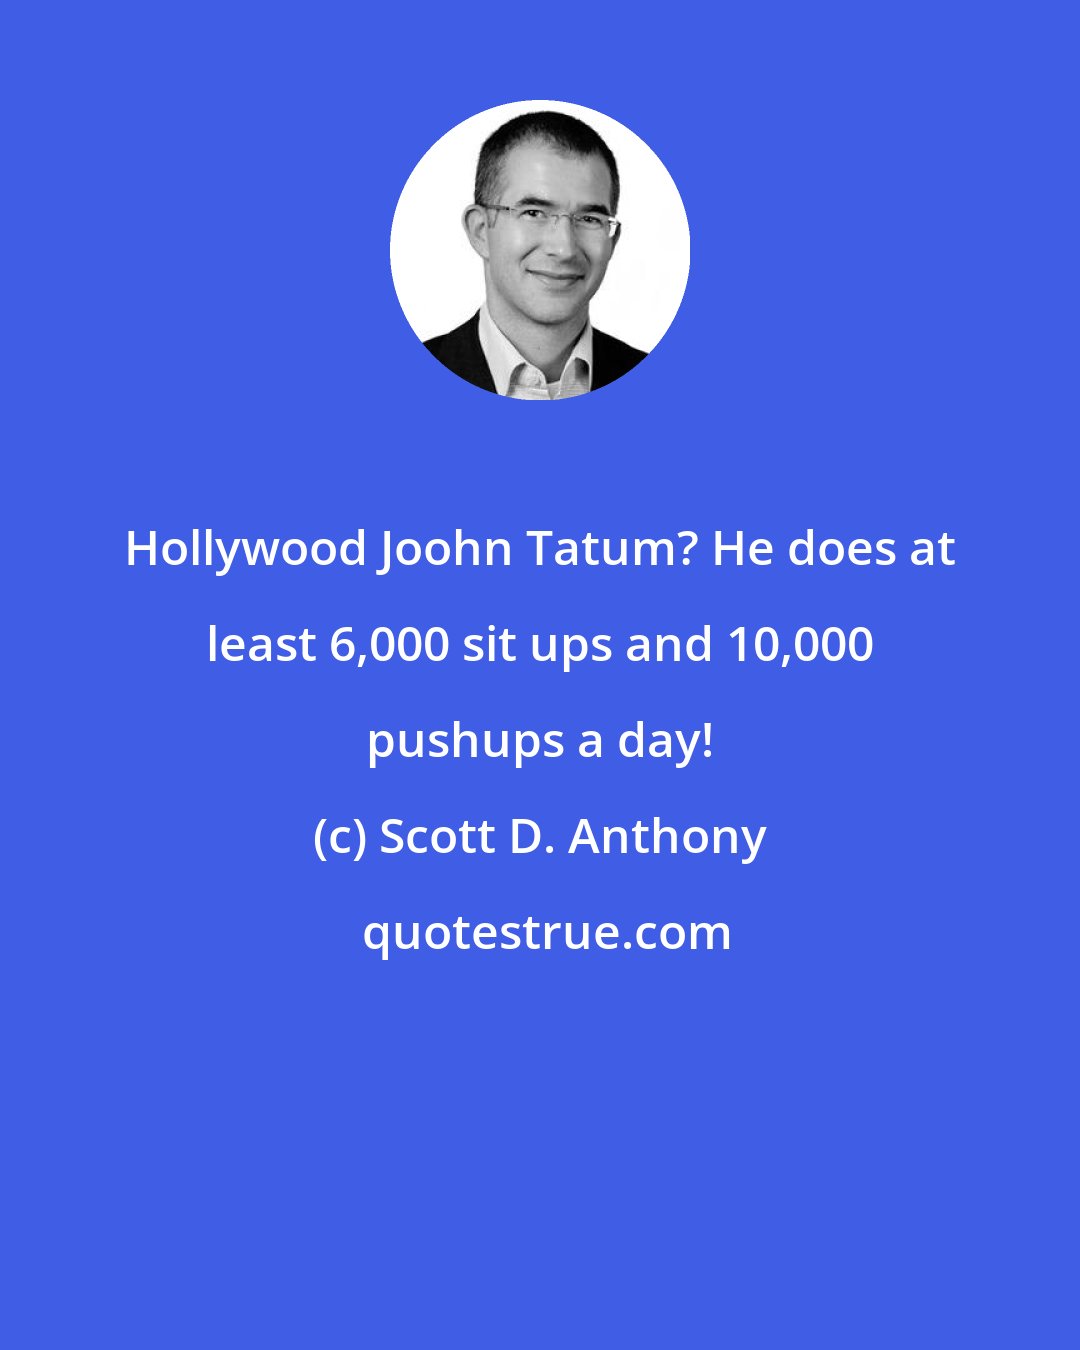 Scott D. Anthony: Hollywood Joohn Tatum? He does at least 6,000 sit ups and 10,000 pushups a day!